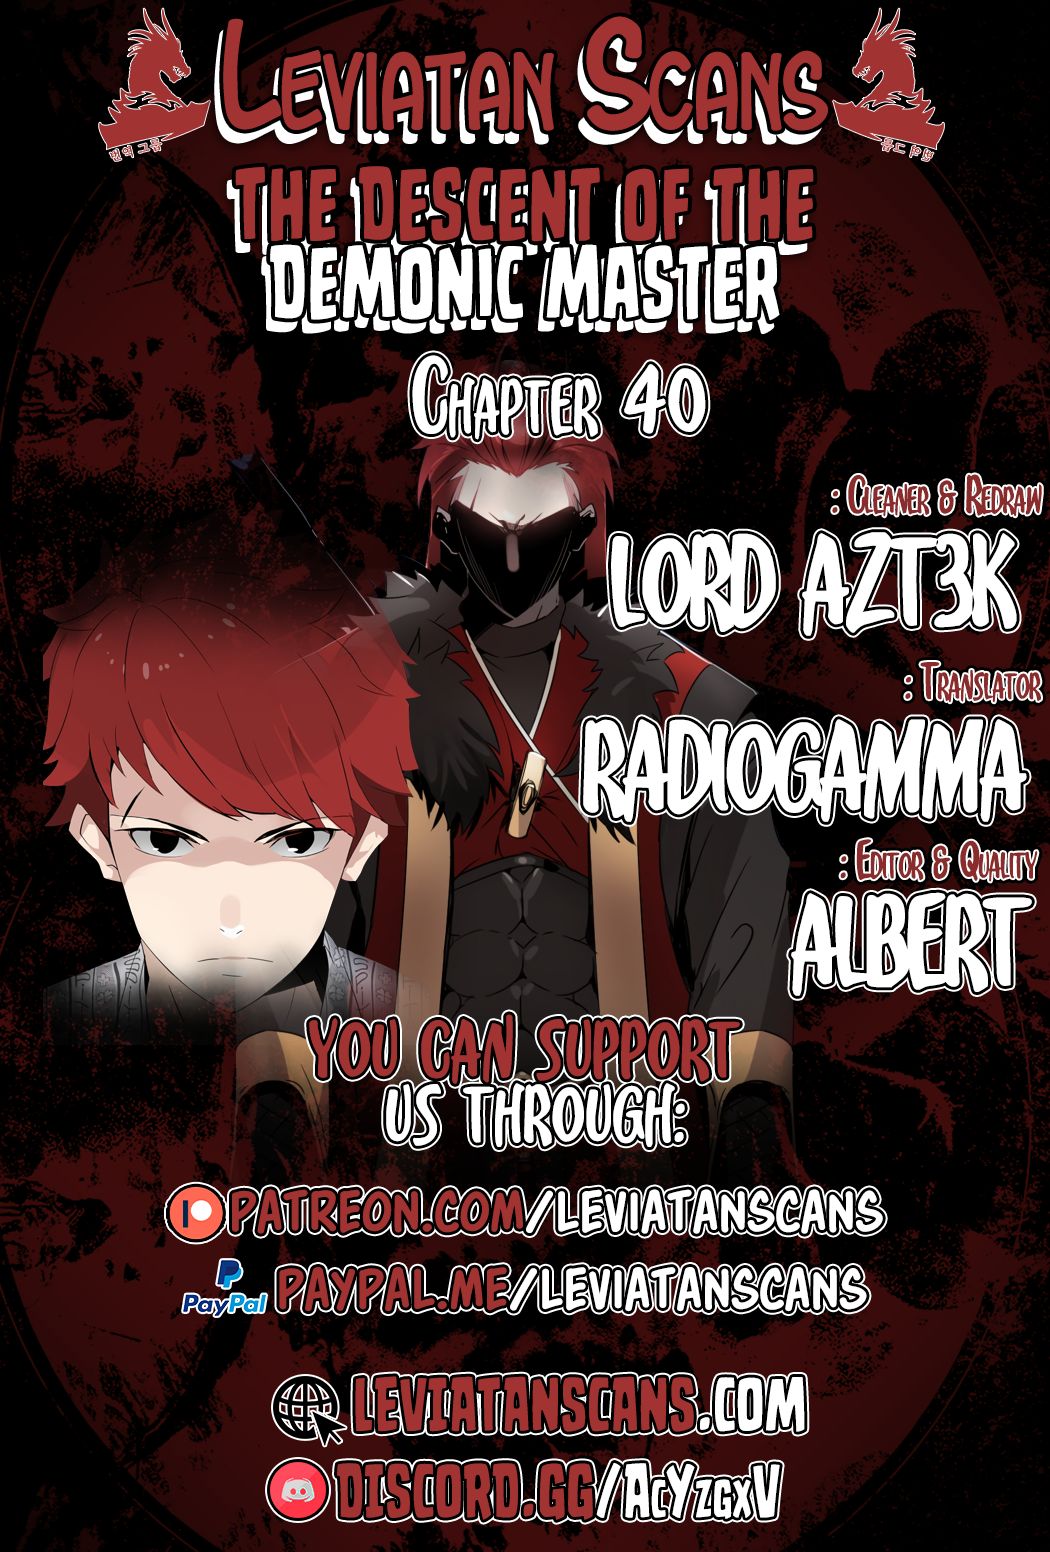 The Descent Of The Demonic Master Chapter 40